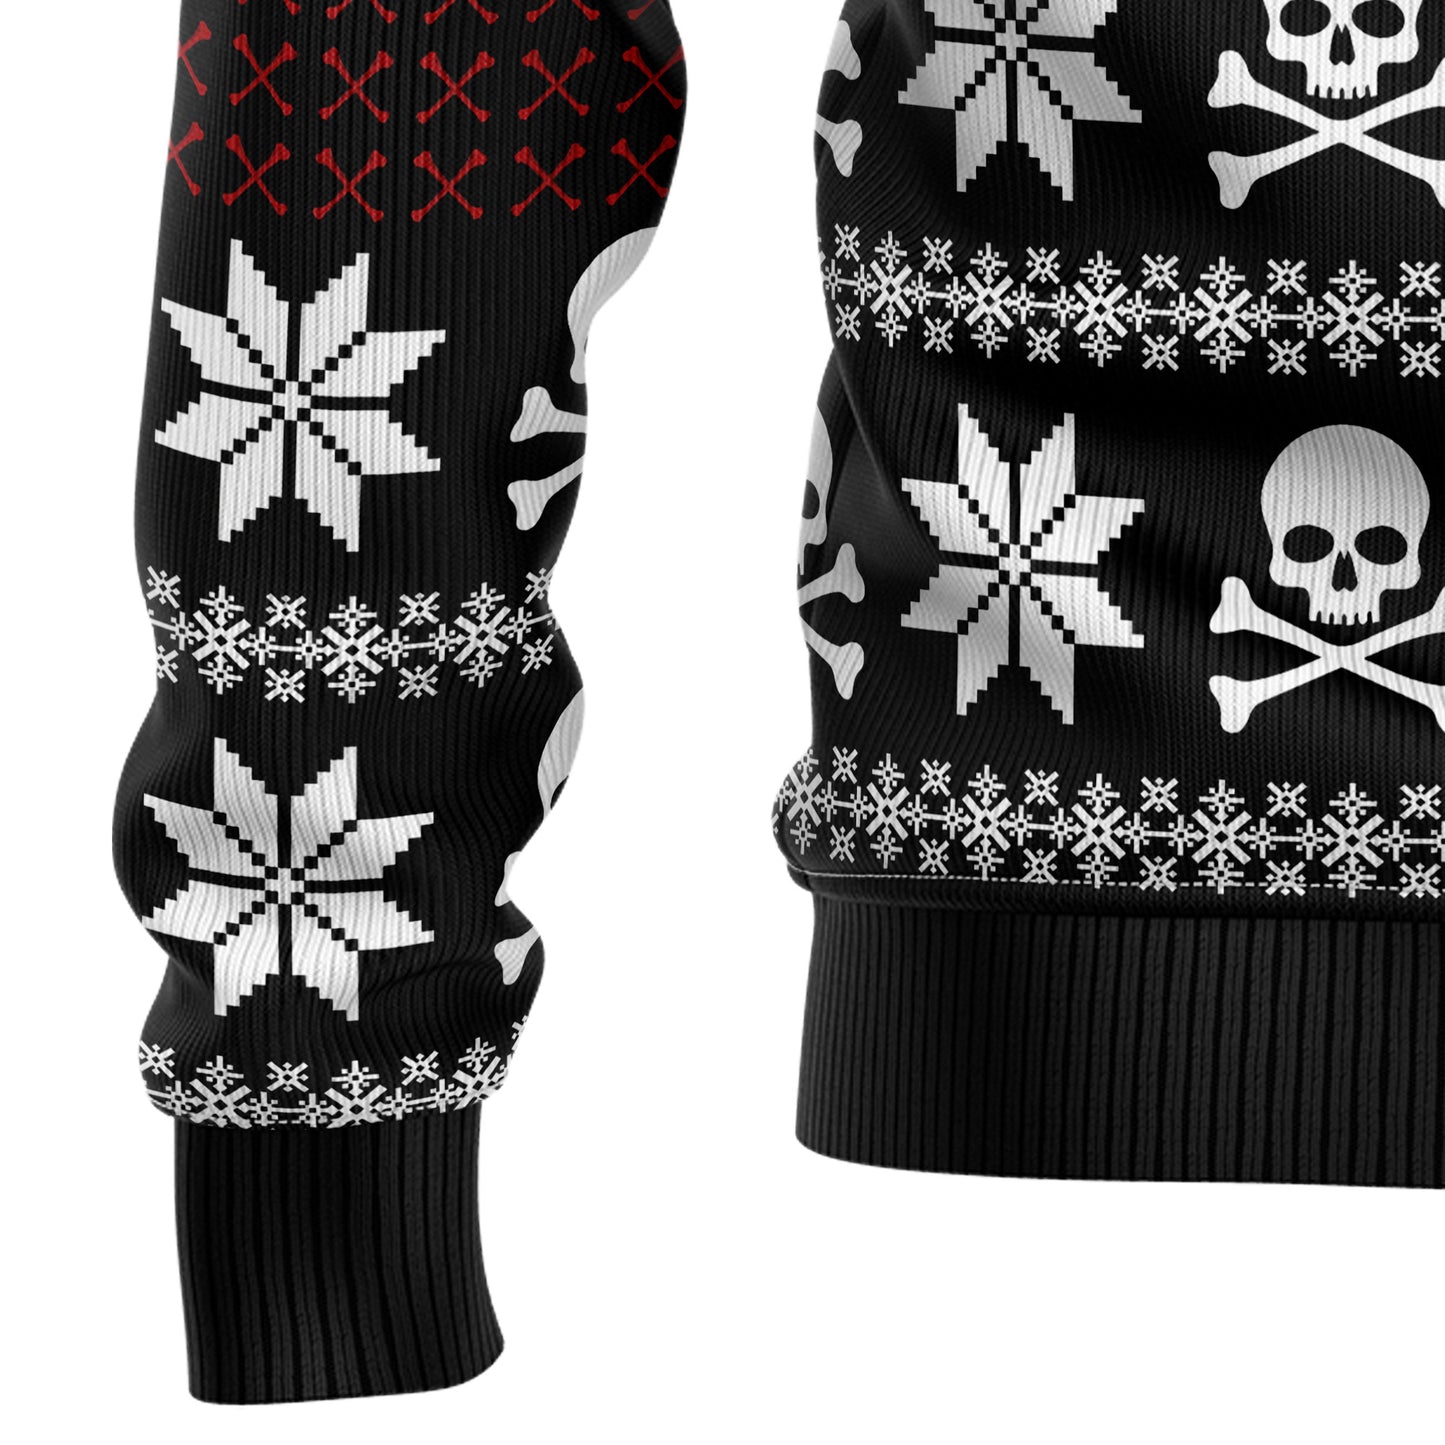 Skull Jolly Face TY510 Ugly Christmas Sweater